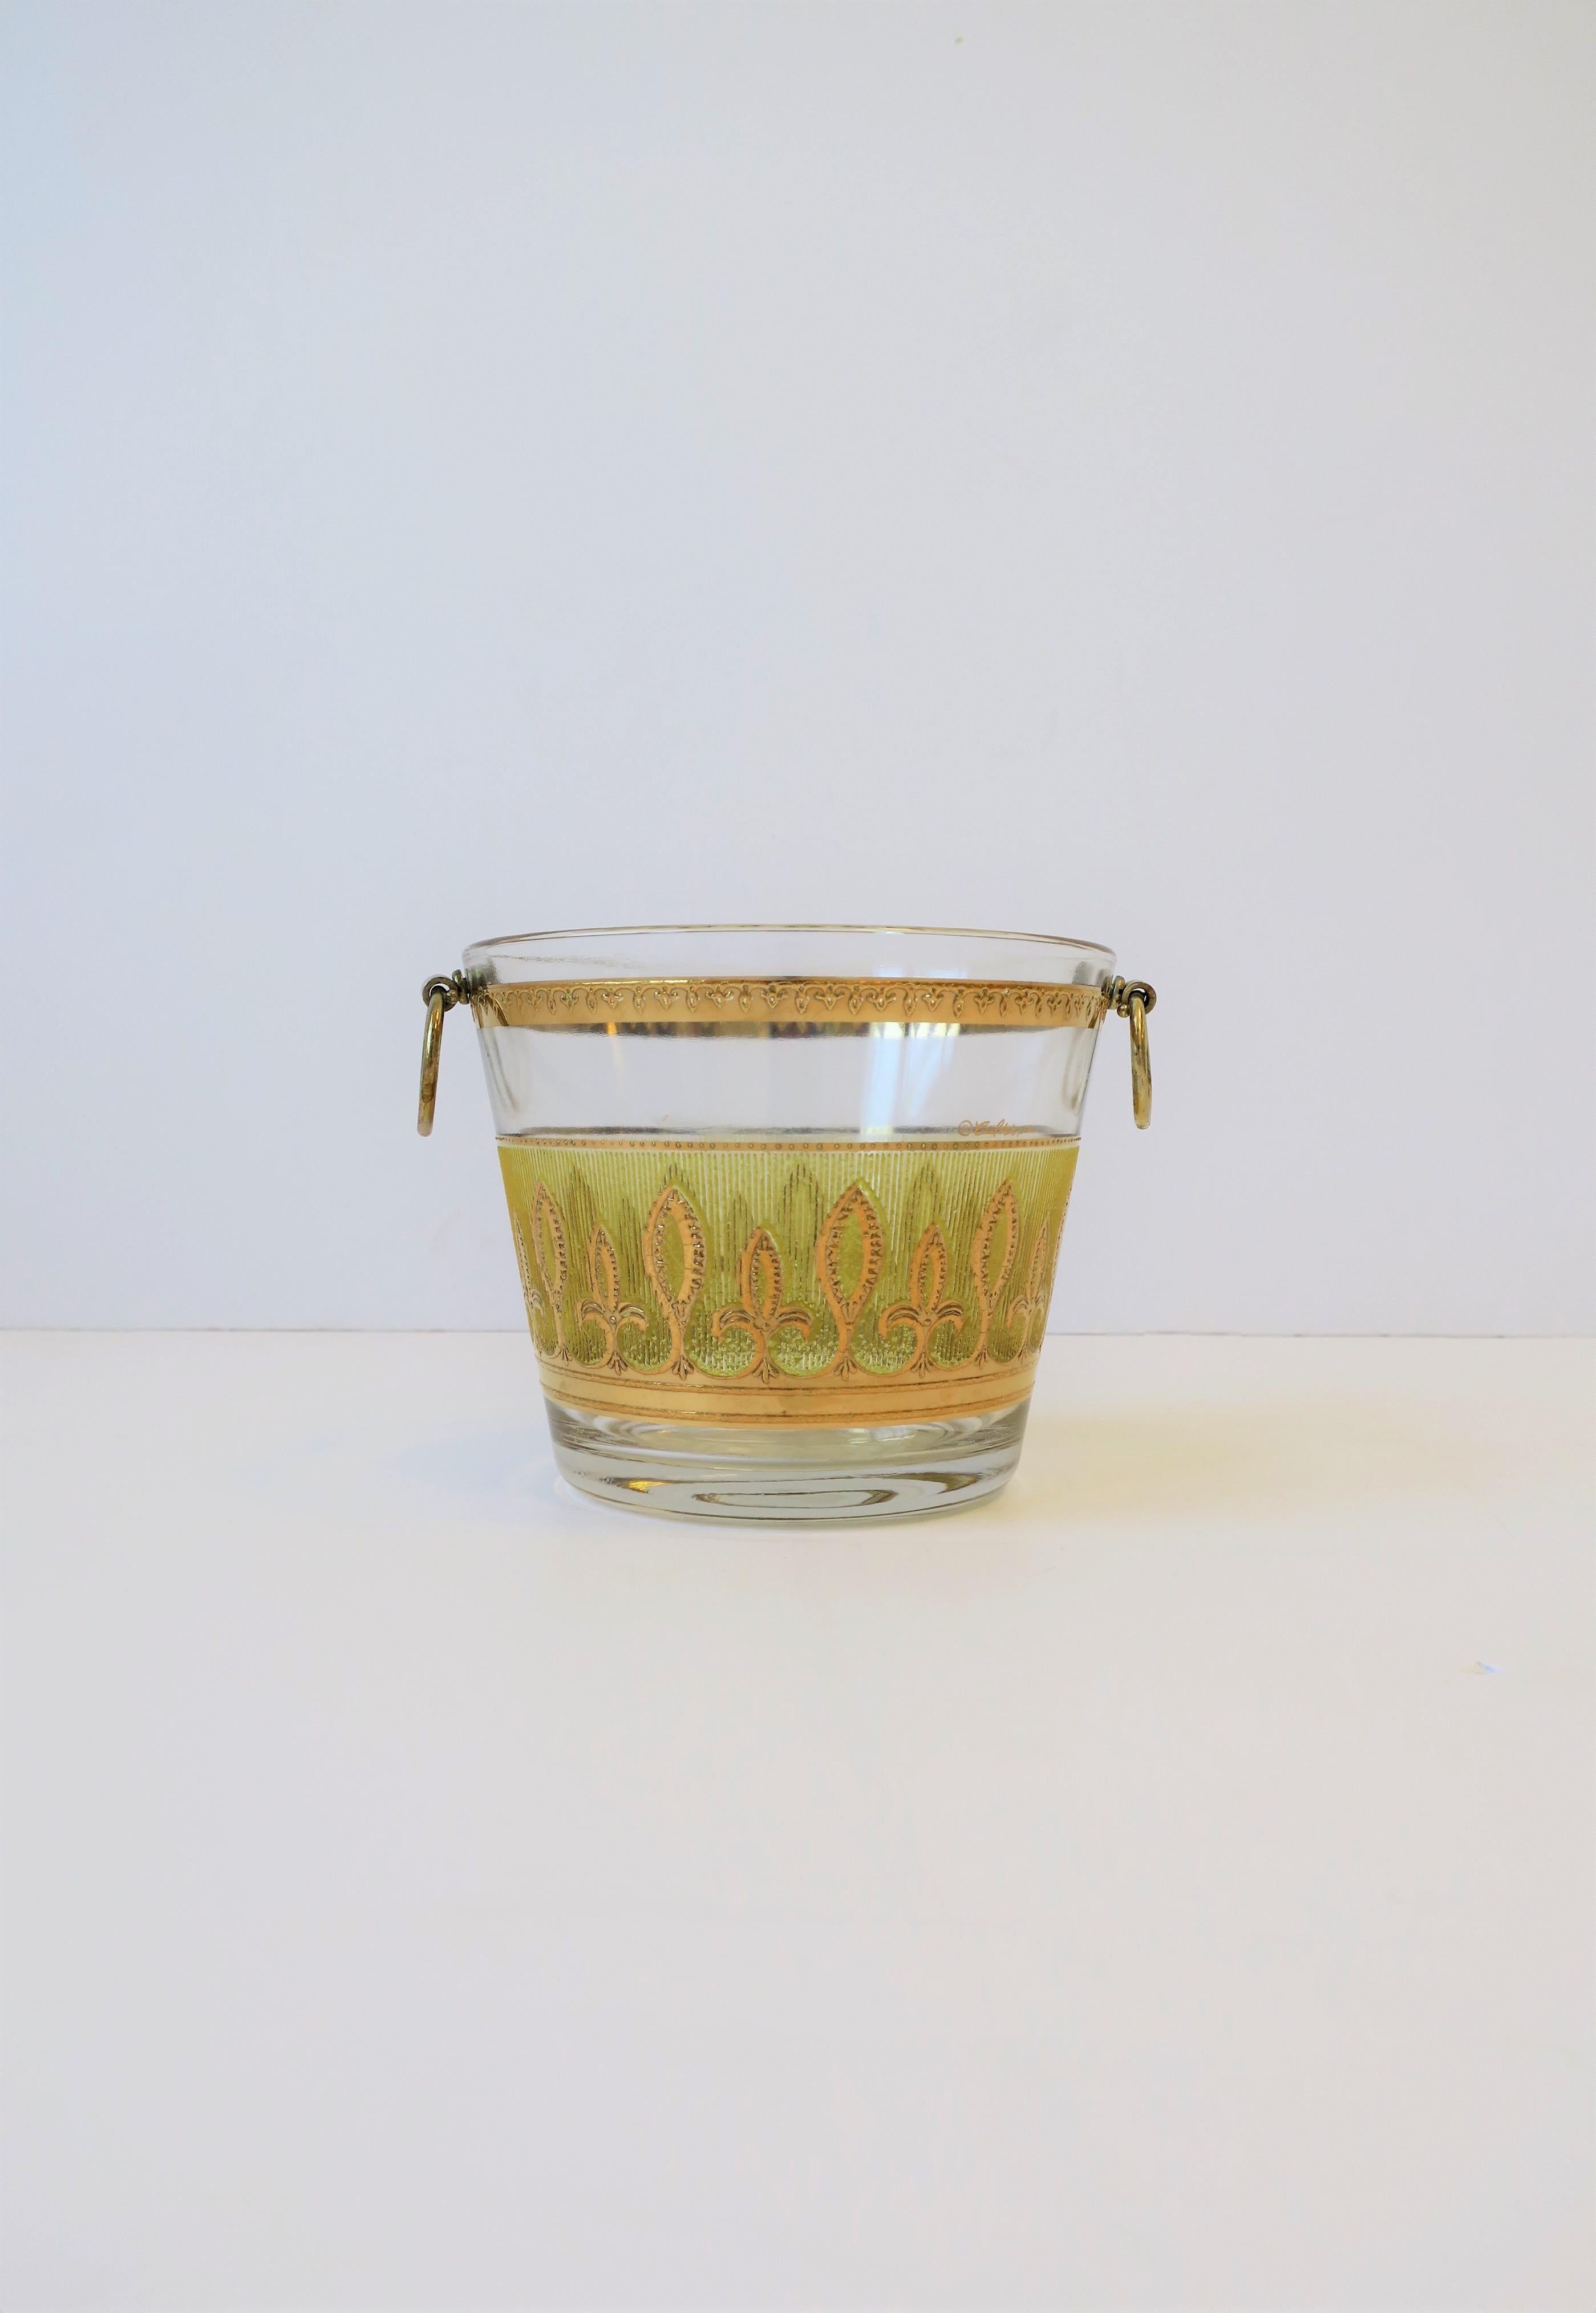 A vintage canary yellow and 22-karat gold ice bucket (or wine cooler) with gold-tone loop handles and a Fleur-de-lis design, in the Hollywood Regency style, by Culver, Ltd., circa mid-20th century, 1960s, Brooklyn, New York. Great for entertaining,